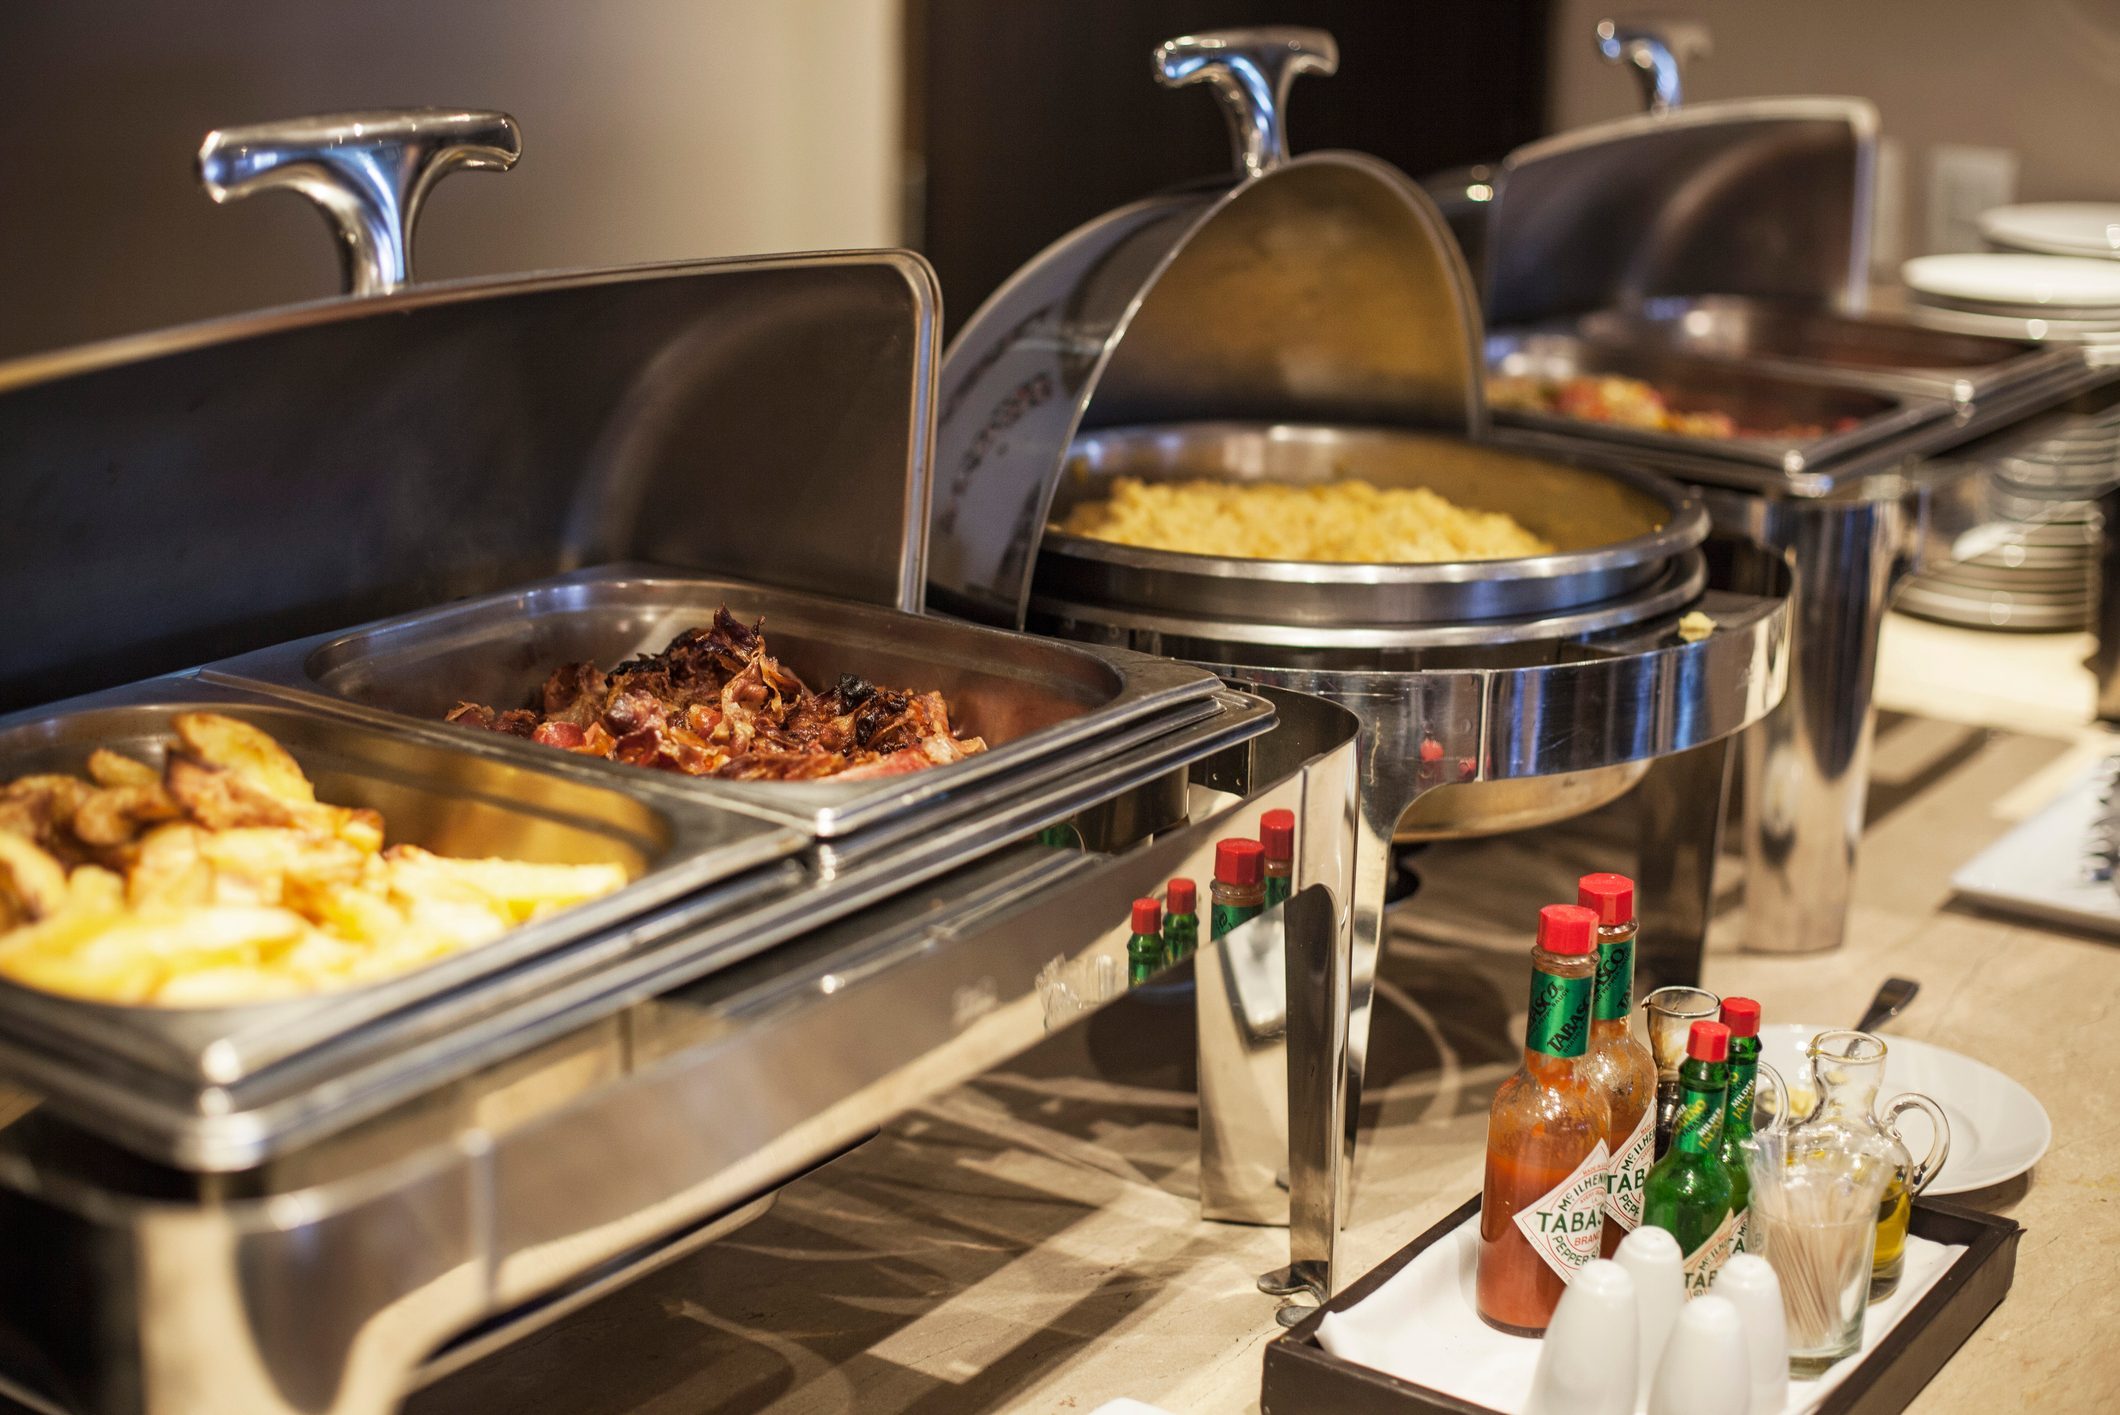 Prepared Food In Warming Dishes On Buffet at a hotel